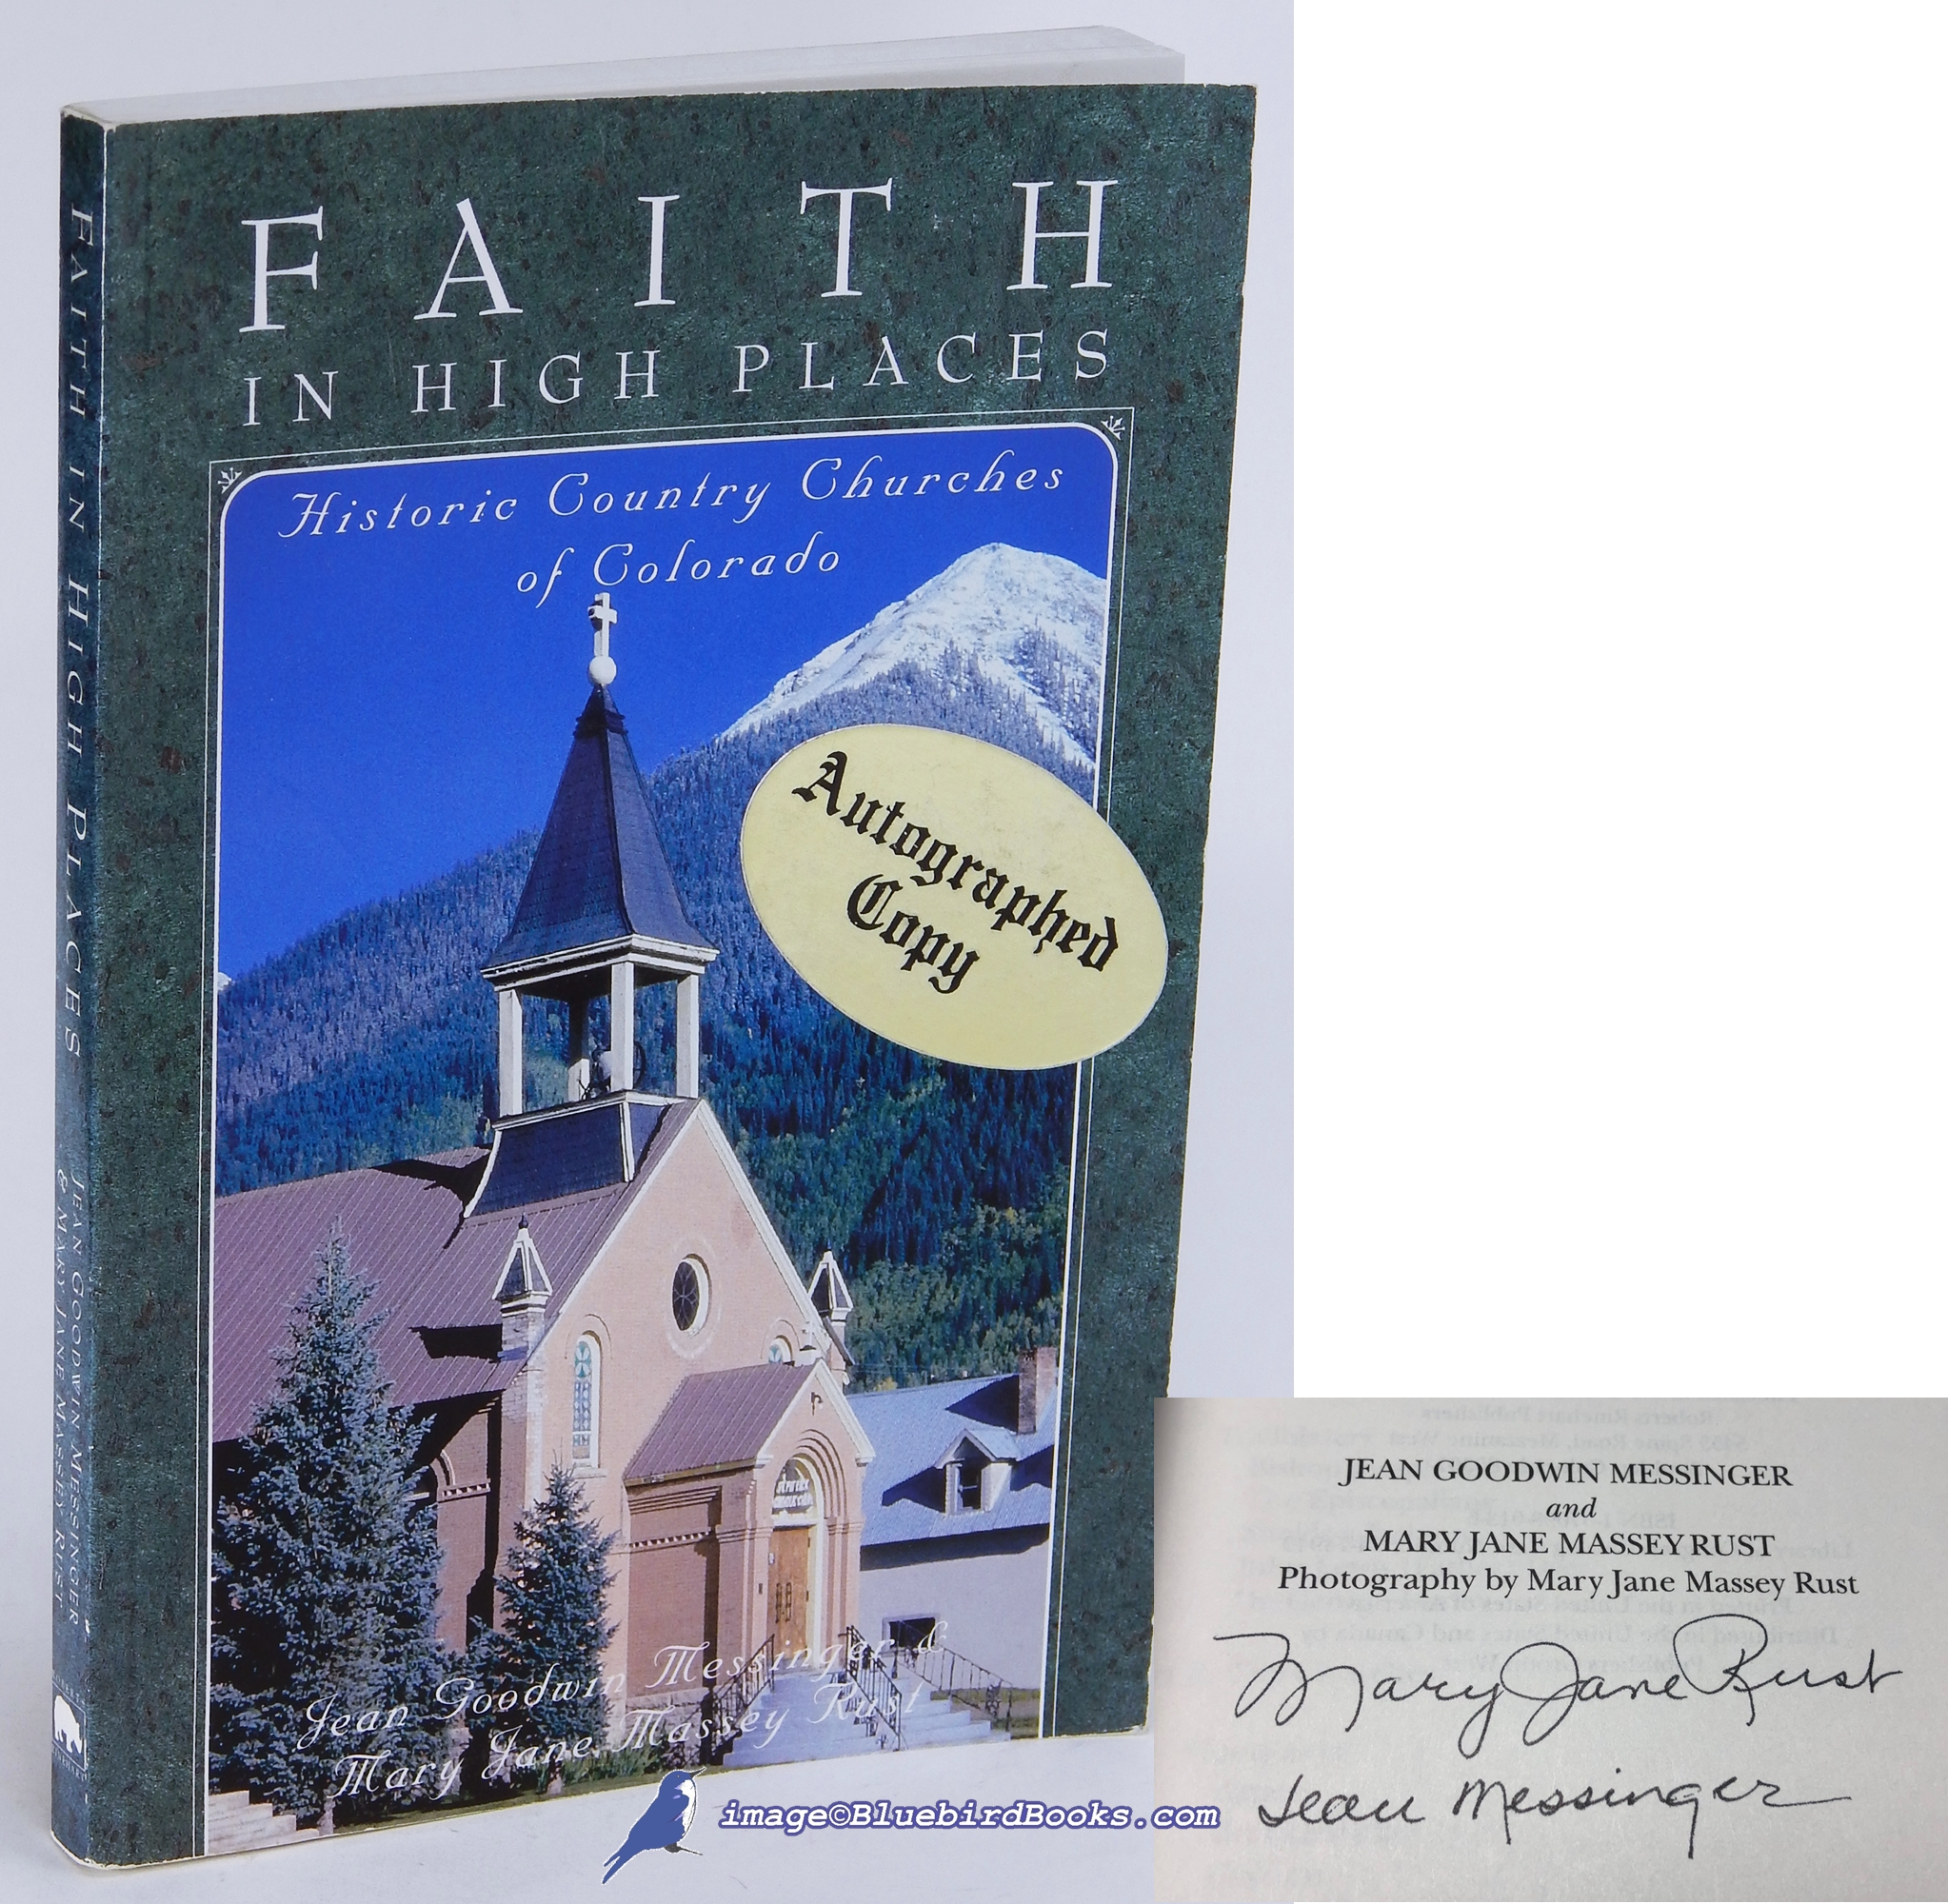 MESSINGER, JEAN GOODWIN; RUST, MARY JANE MASSEY - Faith in High Places: Historic Country Churches of Colorado